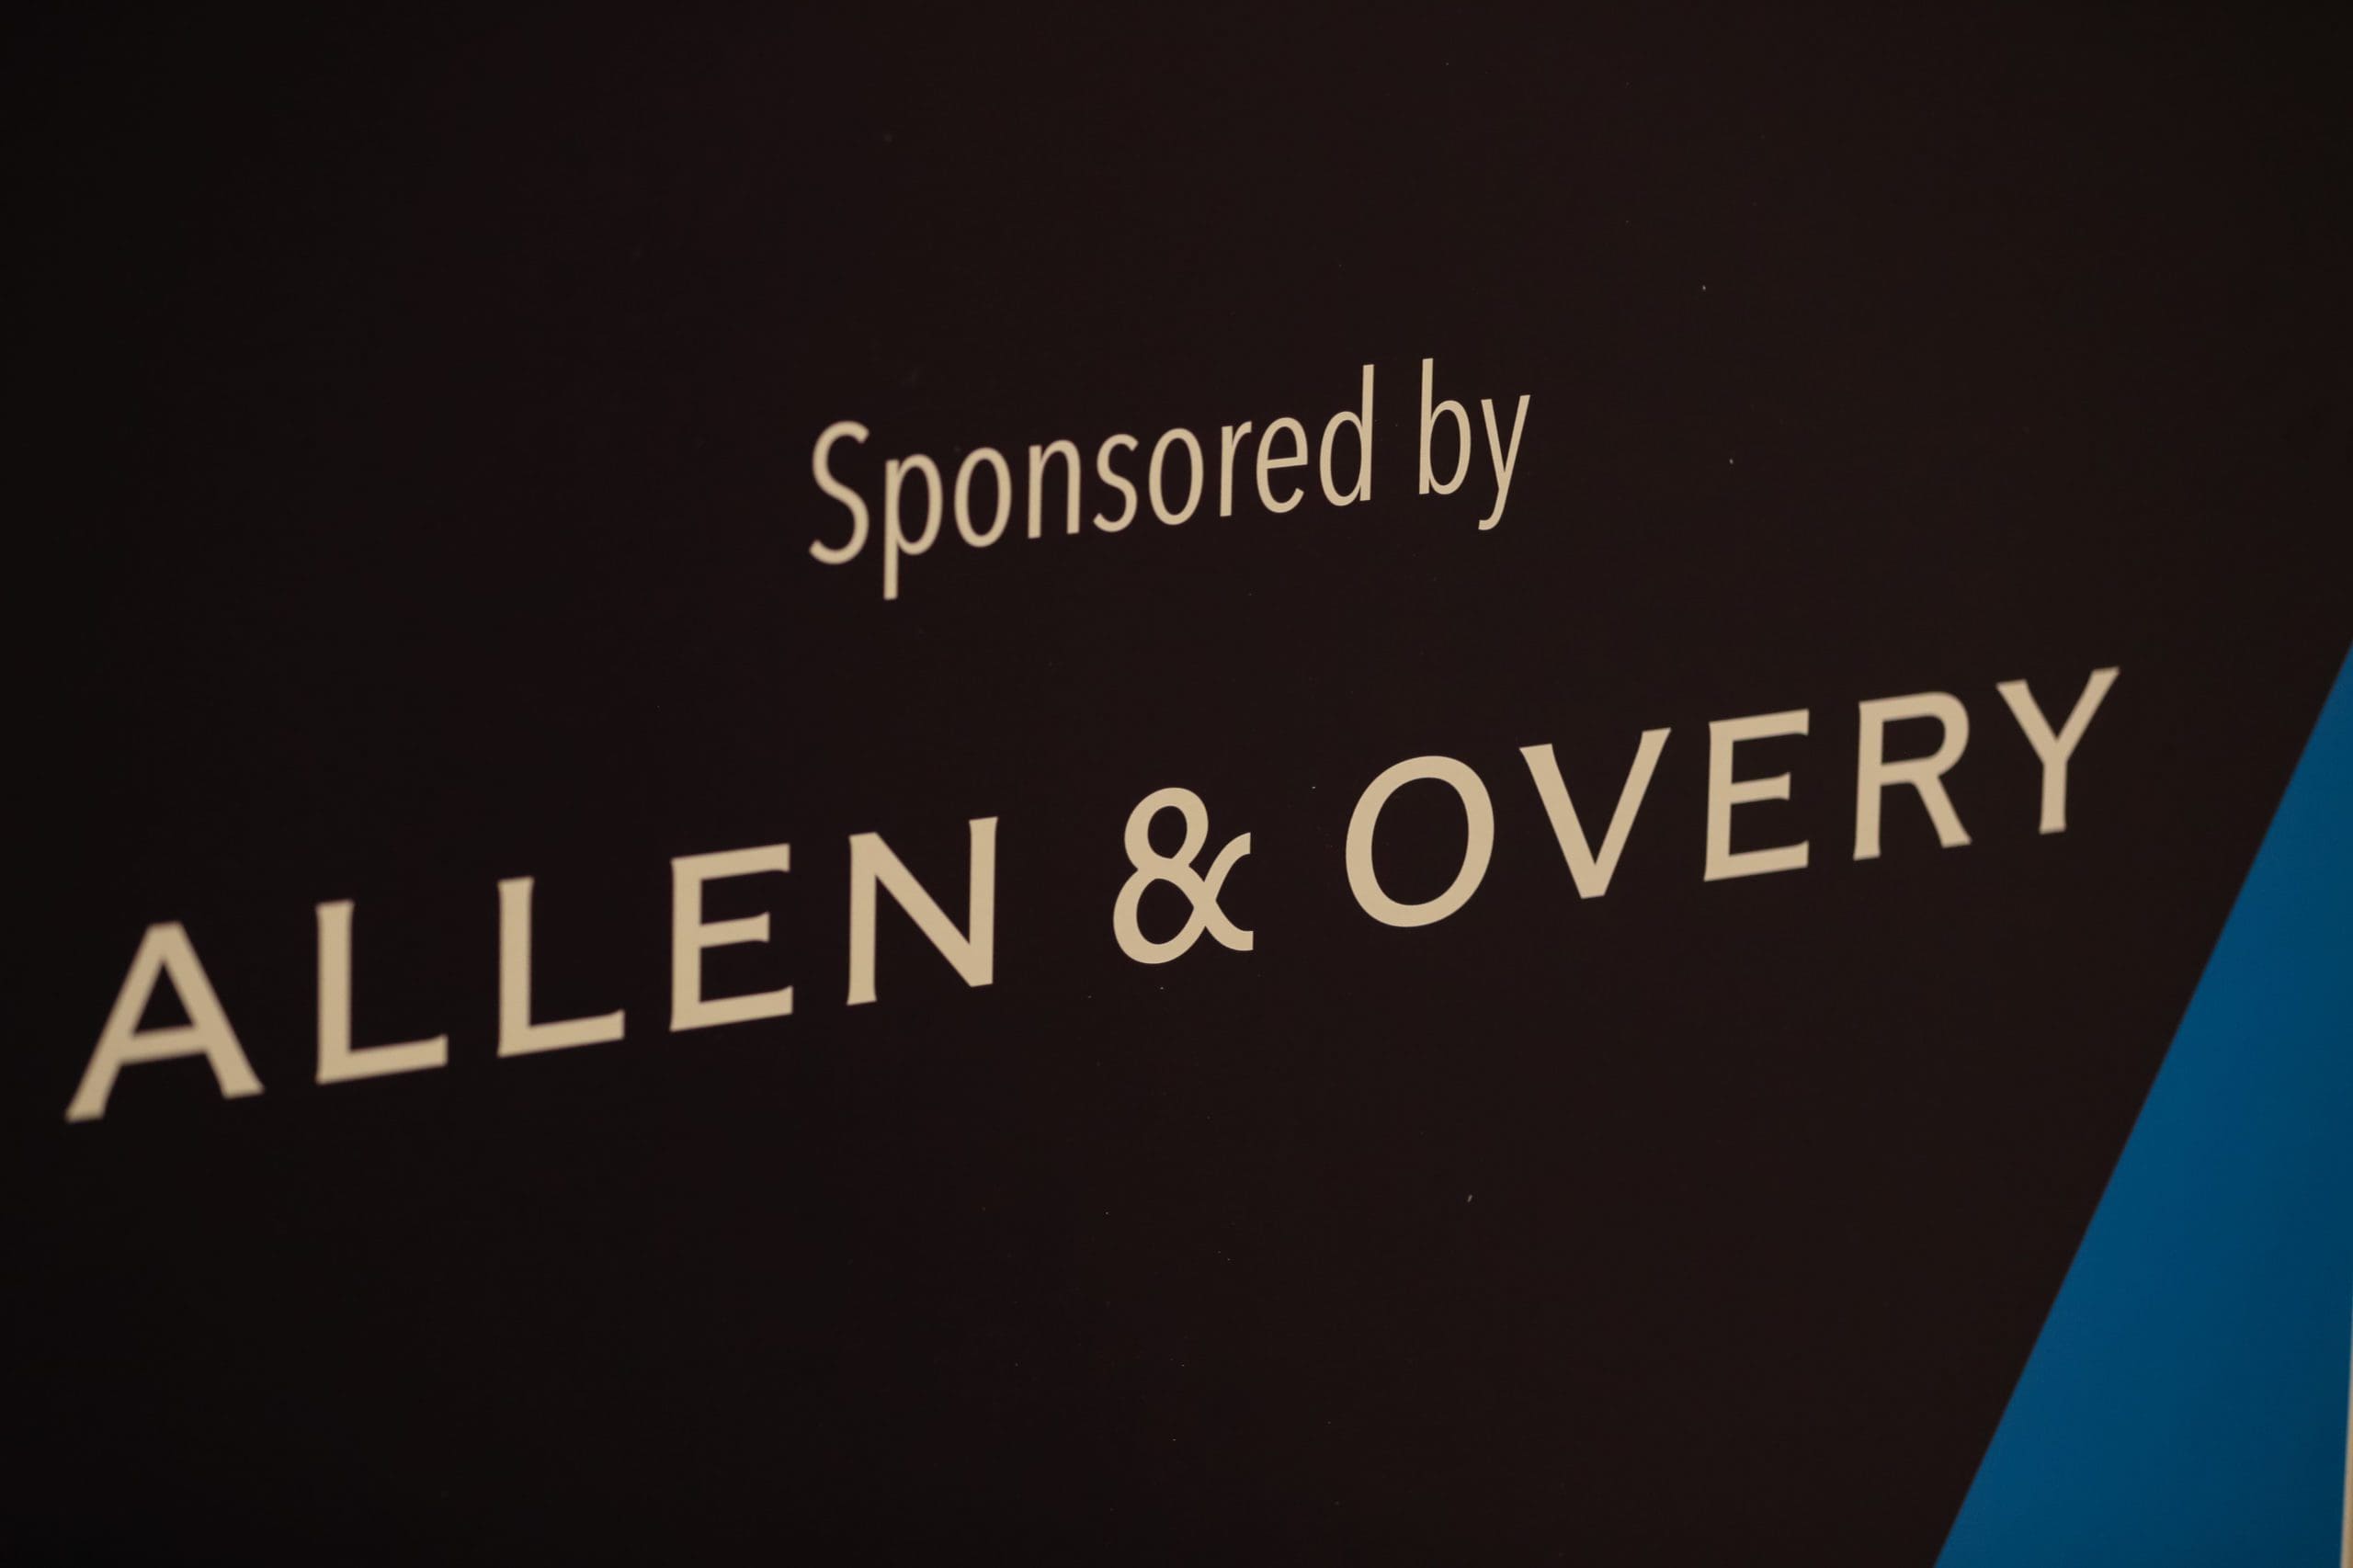 Allen and Overy sponsorship sign